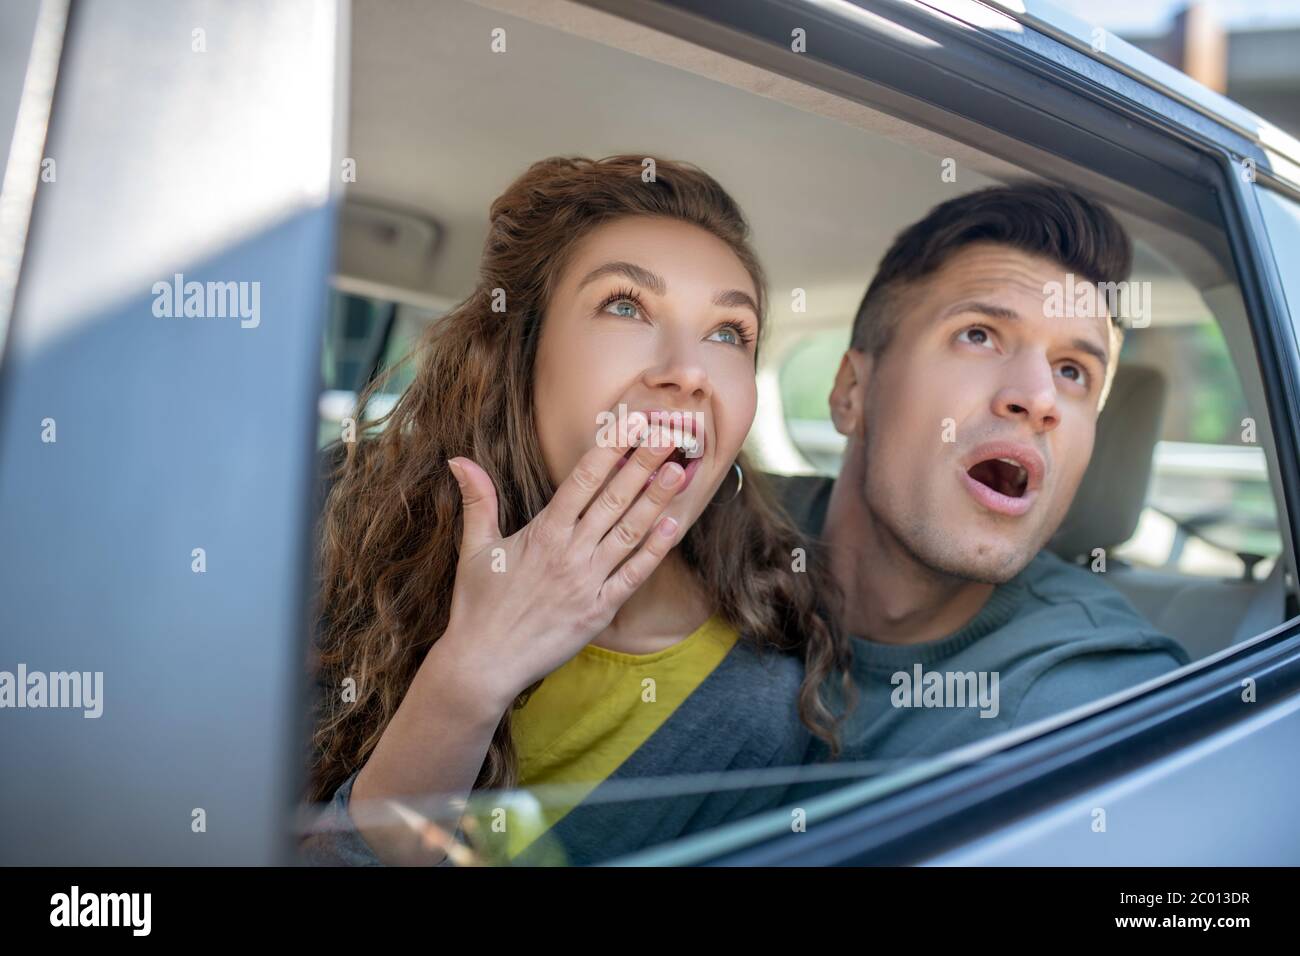 Very surprised man and woman looking out of the car. Stock Photo